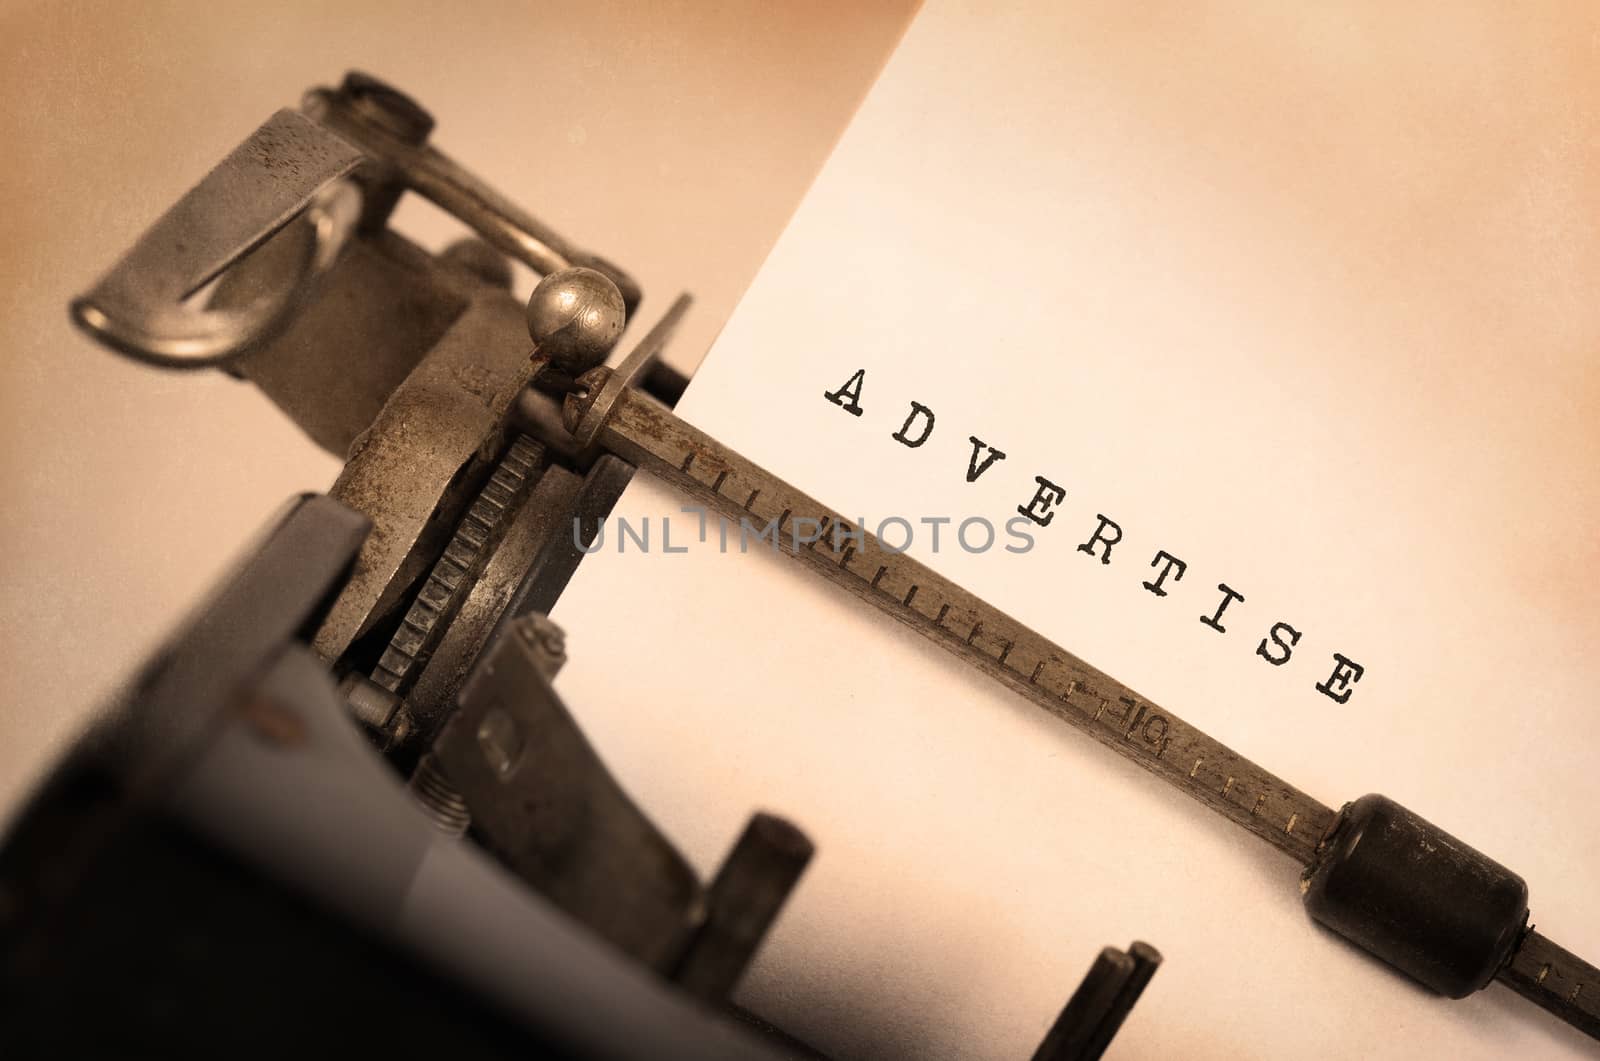 Vintage inscription made by old typewriter, Advertise